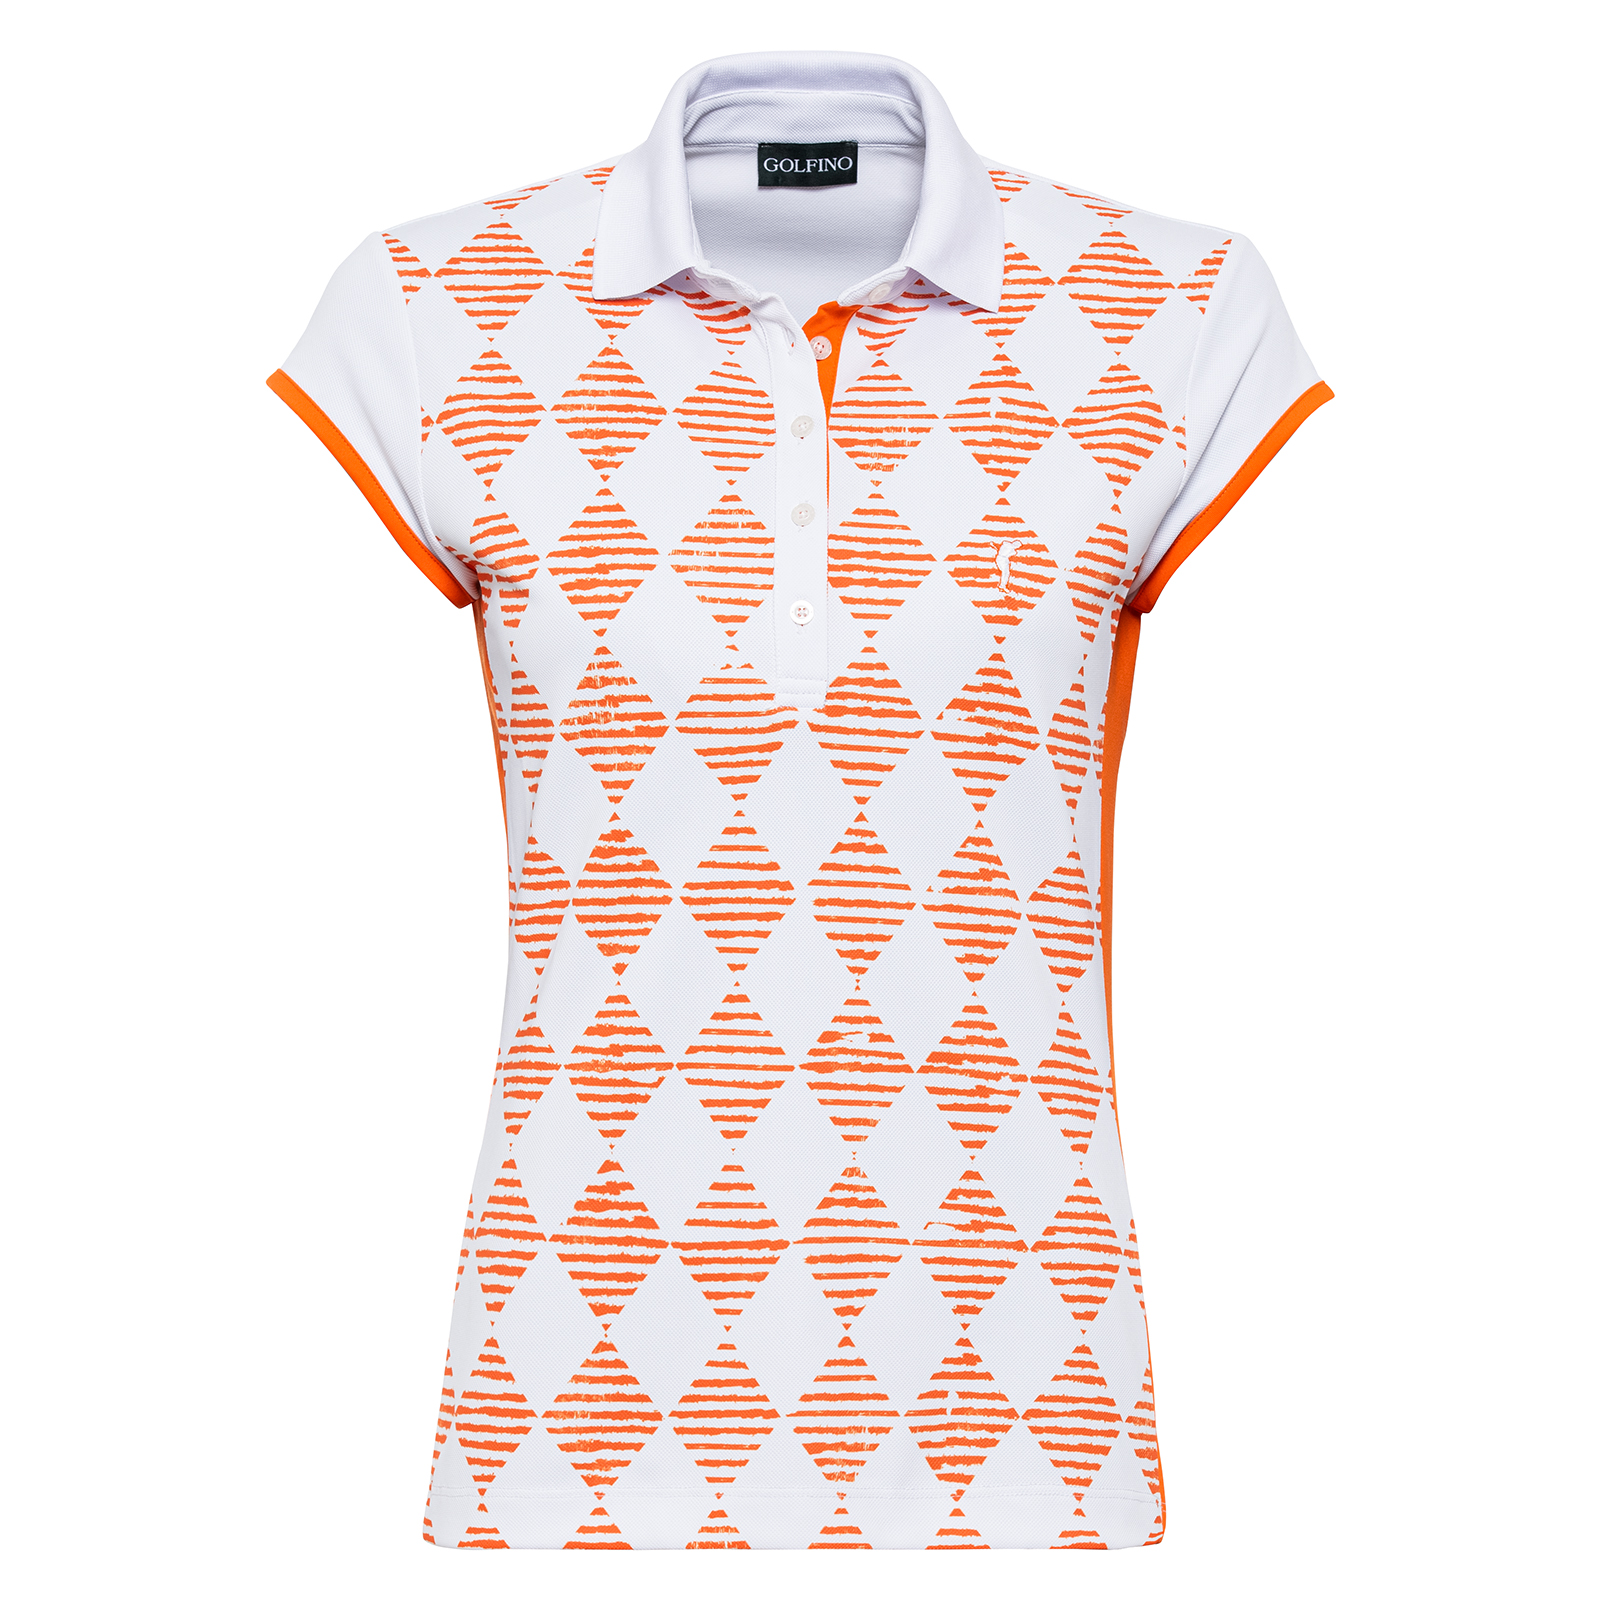 Ladies' quick dry golf polo shirt with argyle pattern